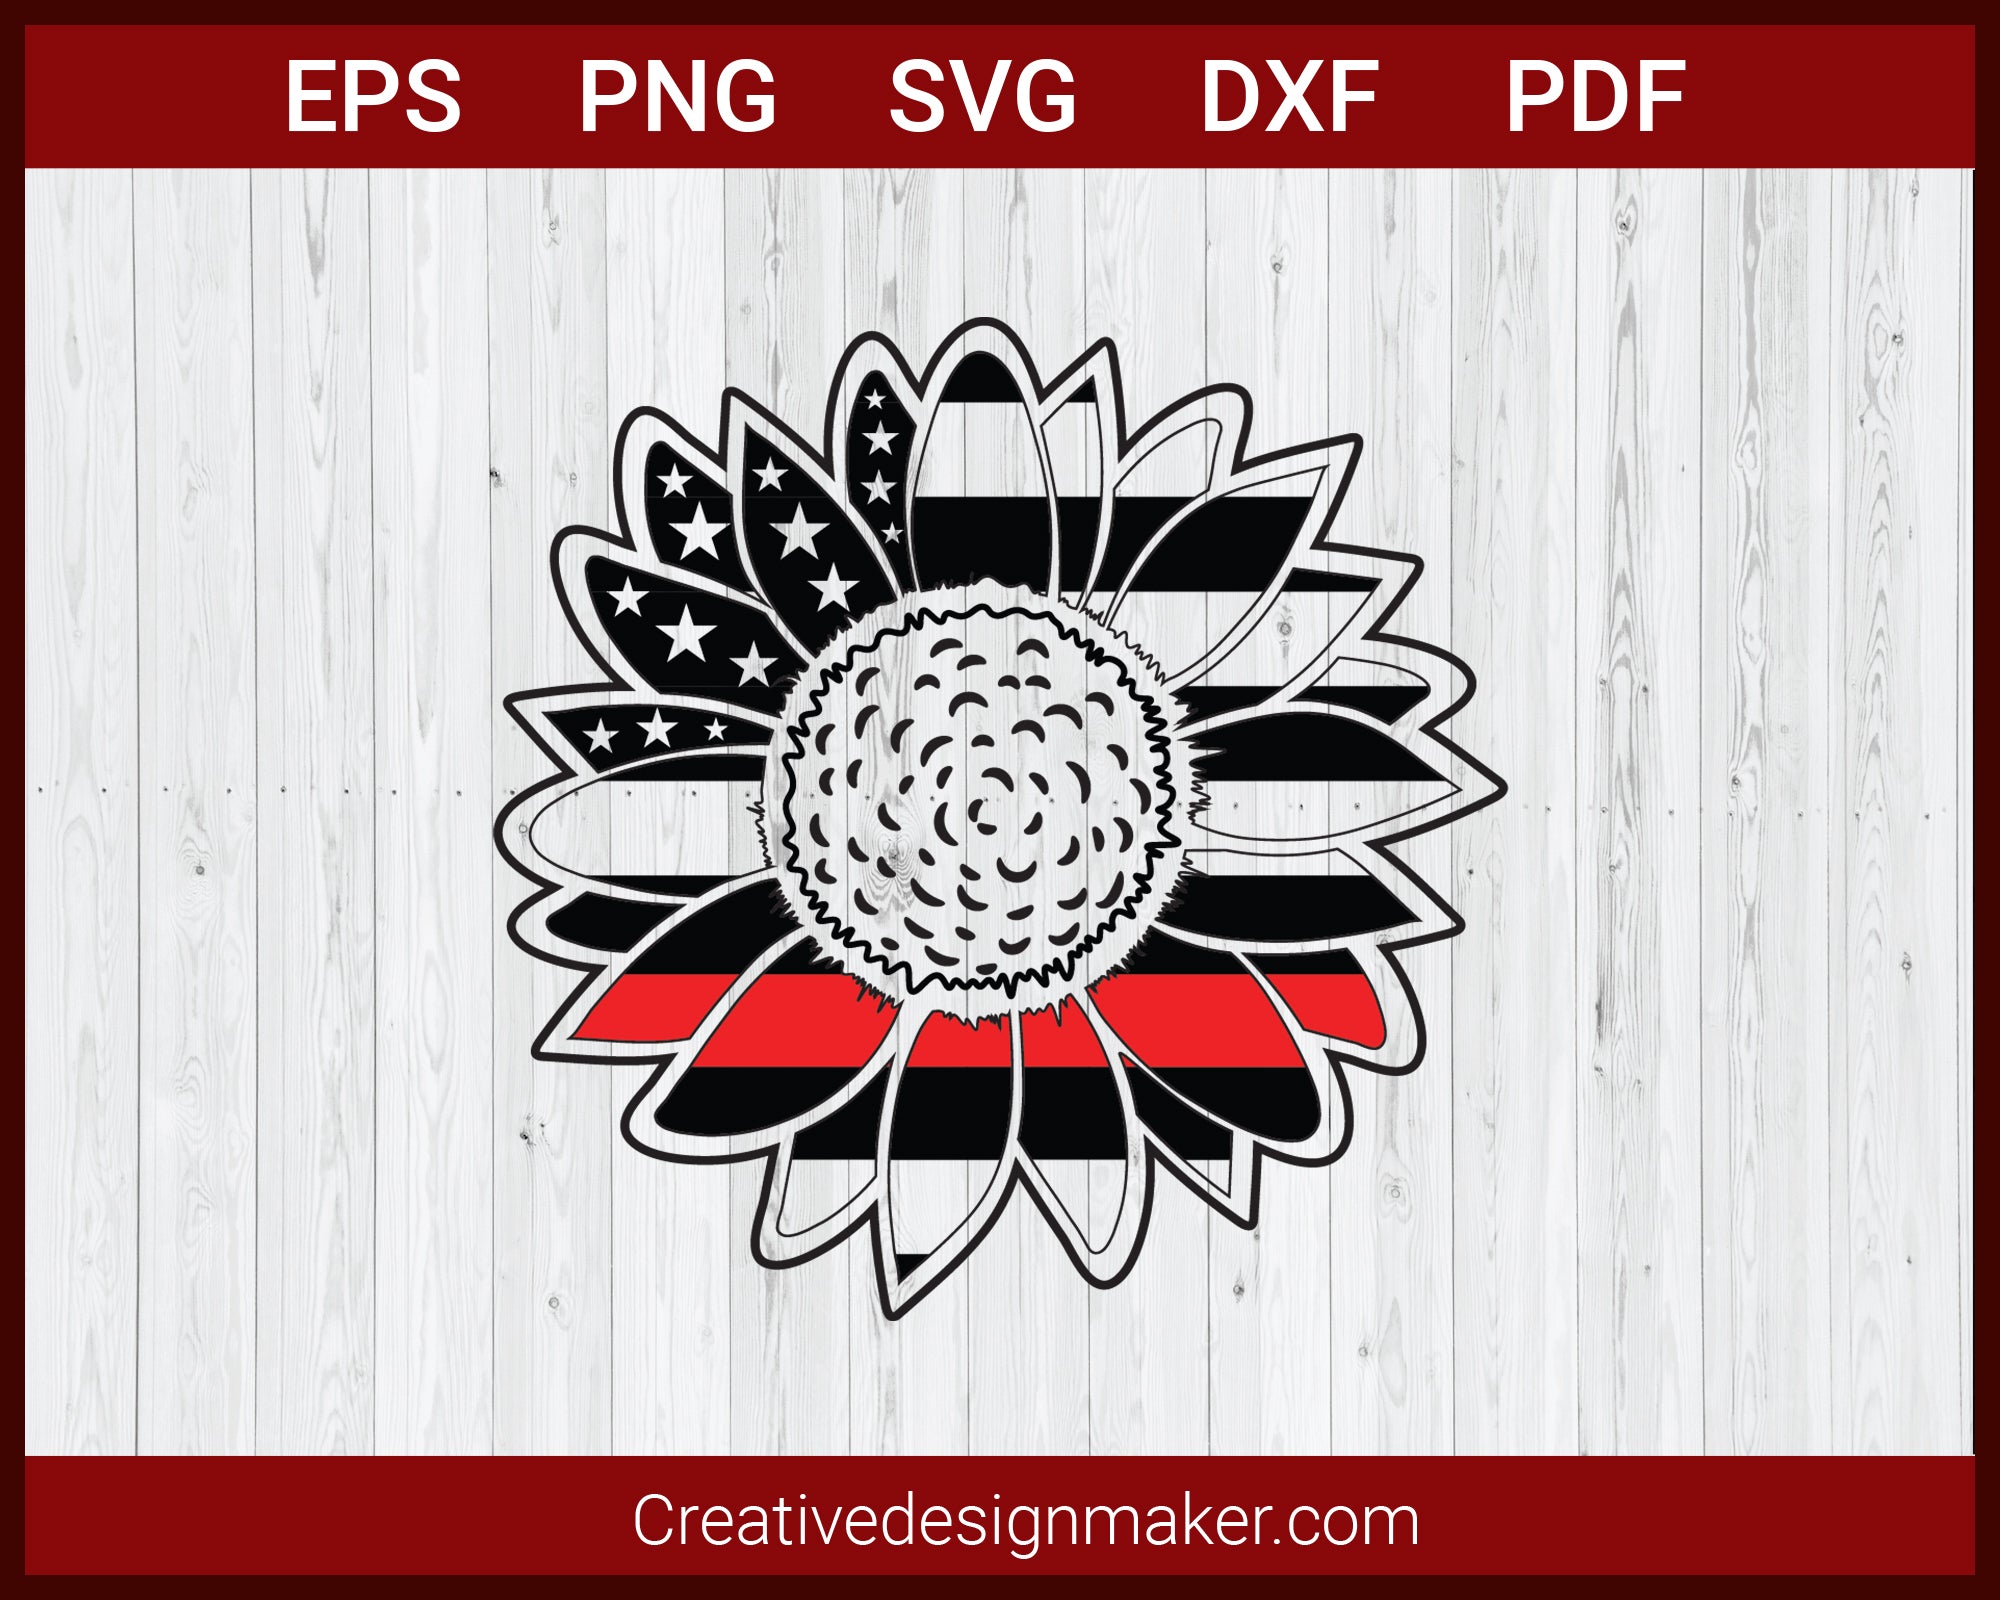 Thin Red Line Sunflower Svg Cricut Silhouette Dxf Png Eps Cut File Creativedesignmaker